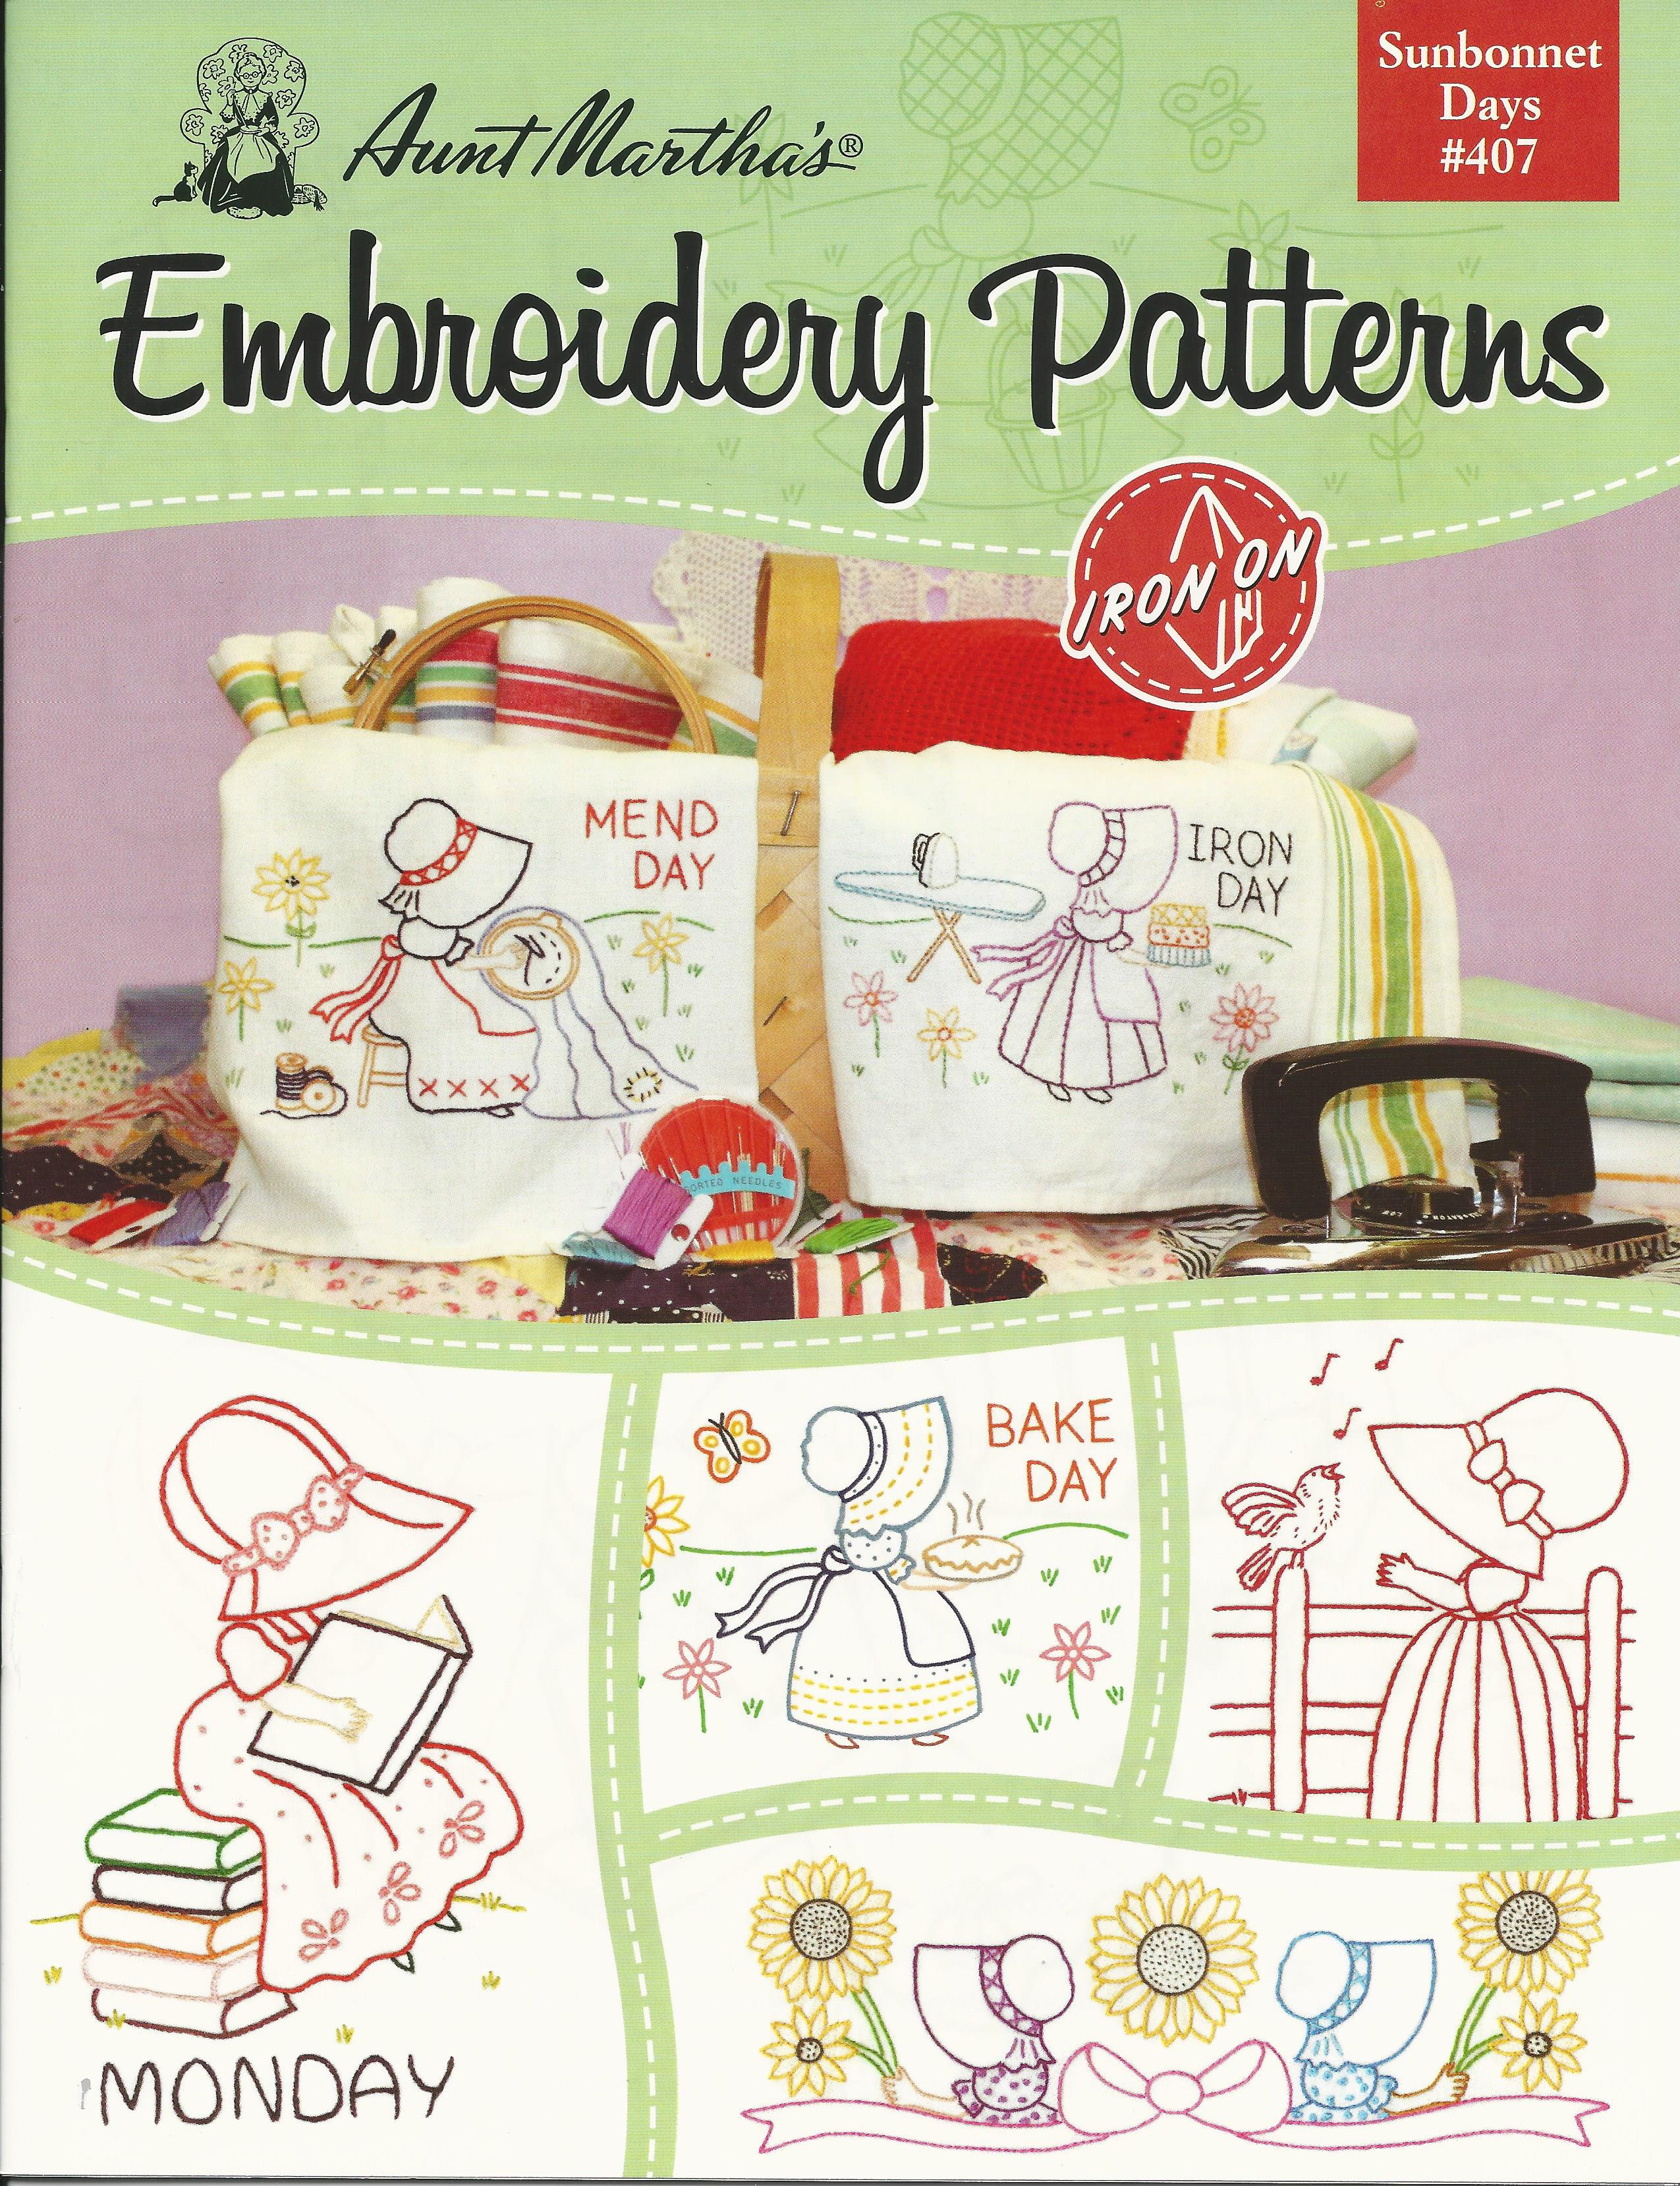 Sunbonnet Sue Embroidery Patterns Sunbonnet Days B407 Embroidery Patterns Aunt Martha Quilts Of Nauvoo